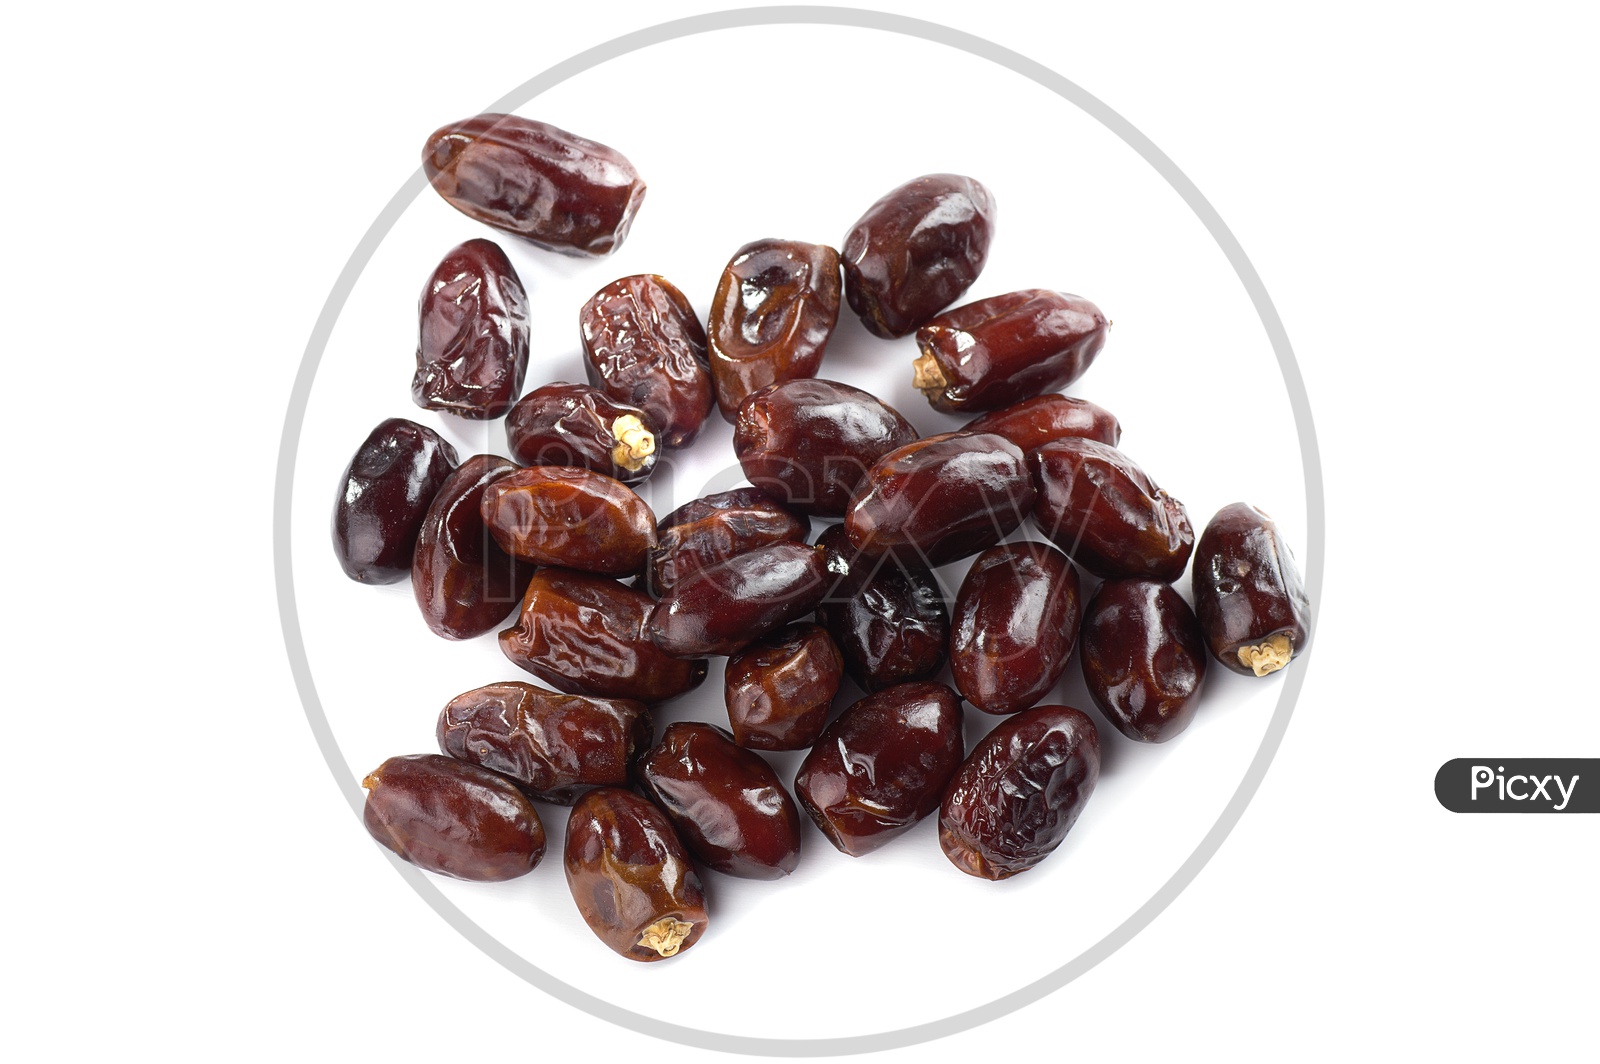 Dates isolated on a white background